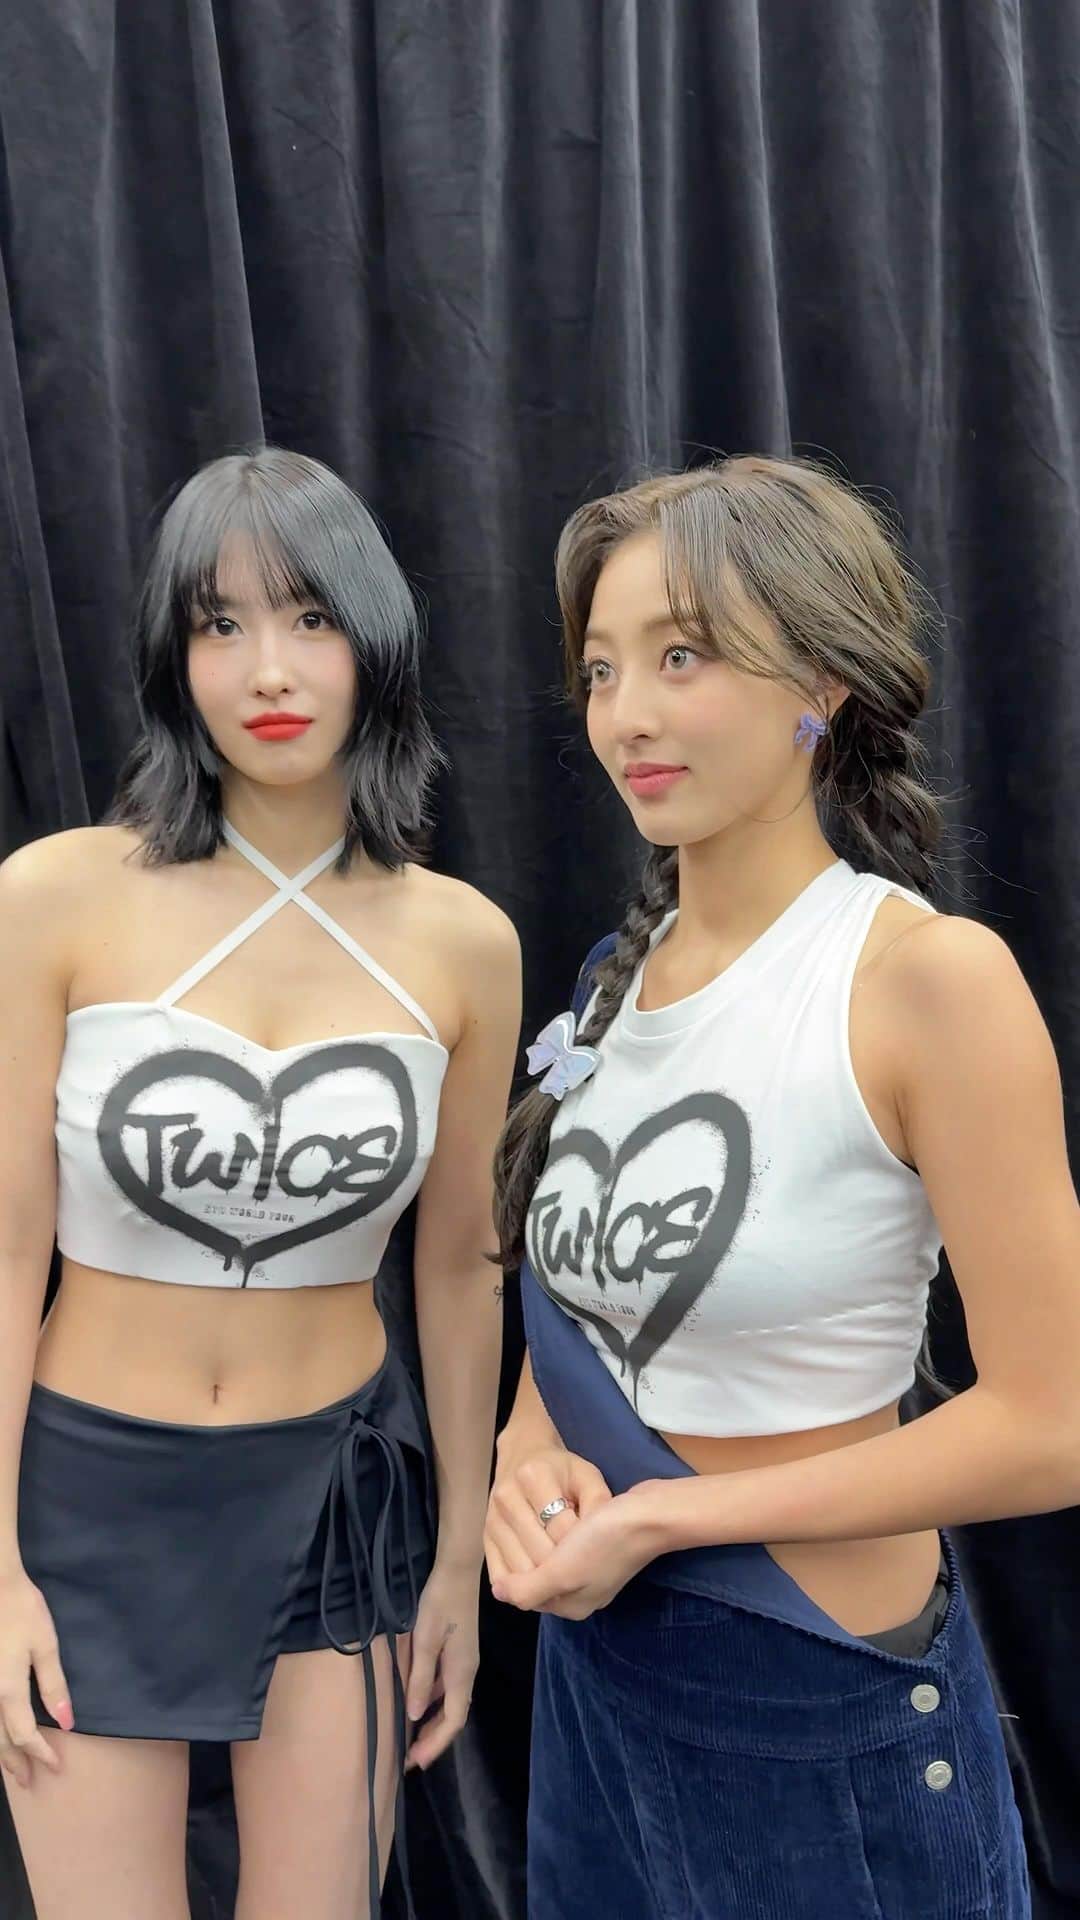 TWICEのインスタグラム：「Who dares to do this challenge?  🐻🦄 #MOREandMORE (LEE HAE SOL Sped Up Remix) Challenge With #MOMO #JIHYO  🎵 Listen "THE REMIXES” TWICE.lnk.to/THEREMIXES  #TWICE #트와이스 #REMIX #THEREMIXES #SpedUpRemix」